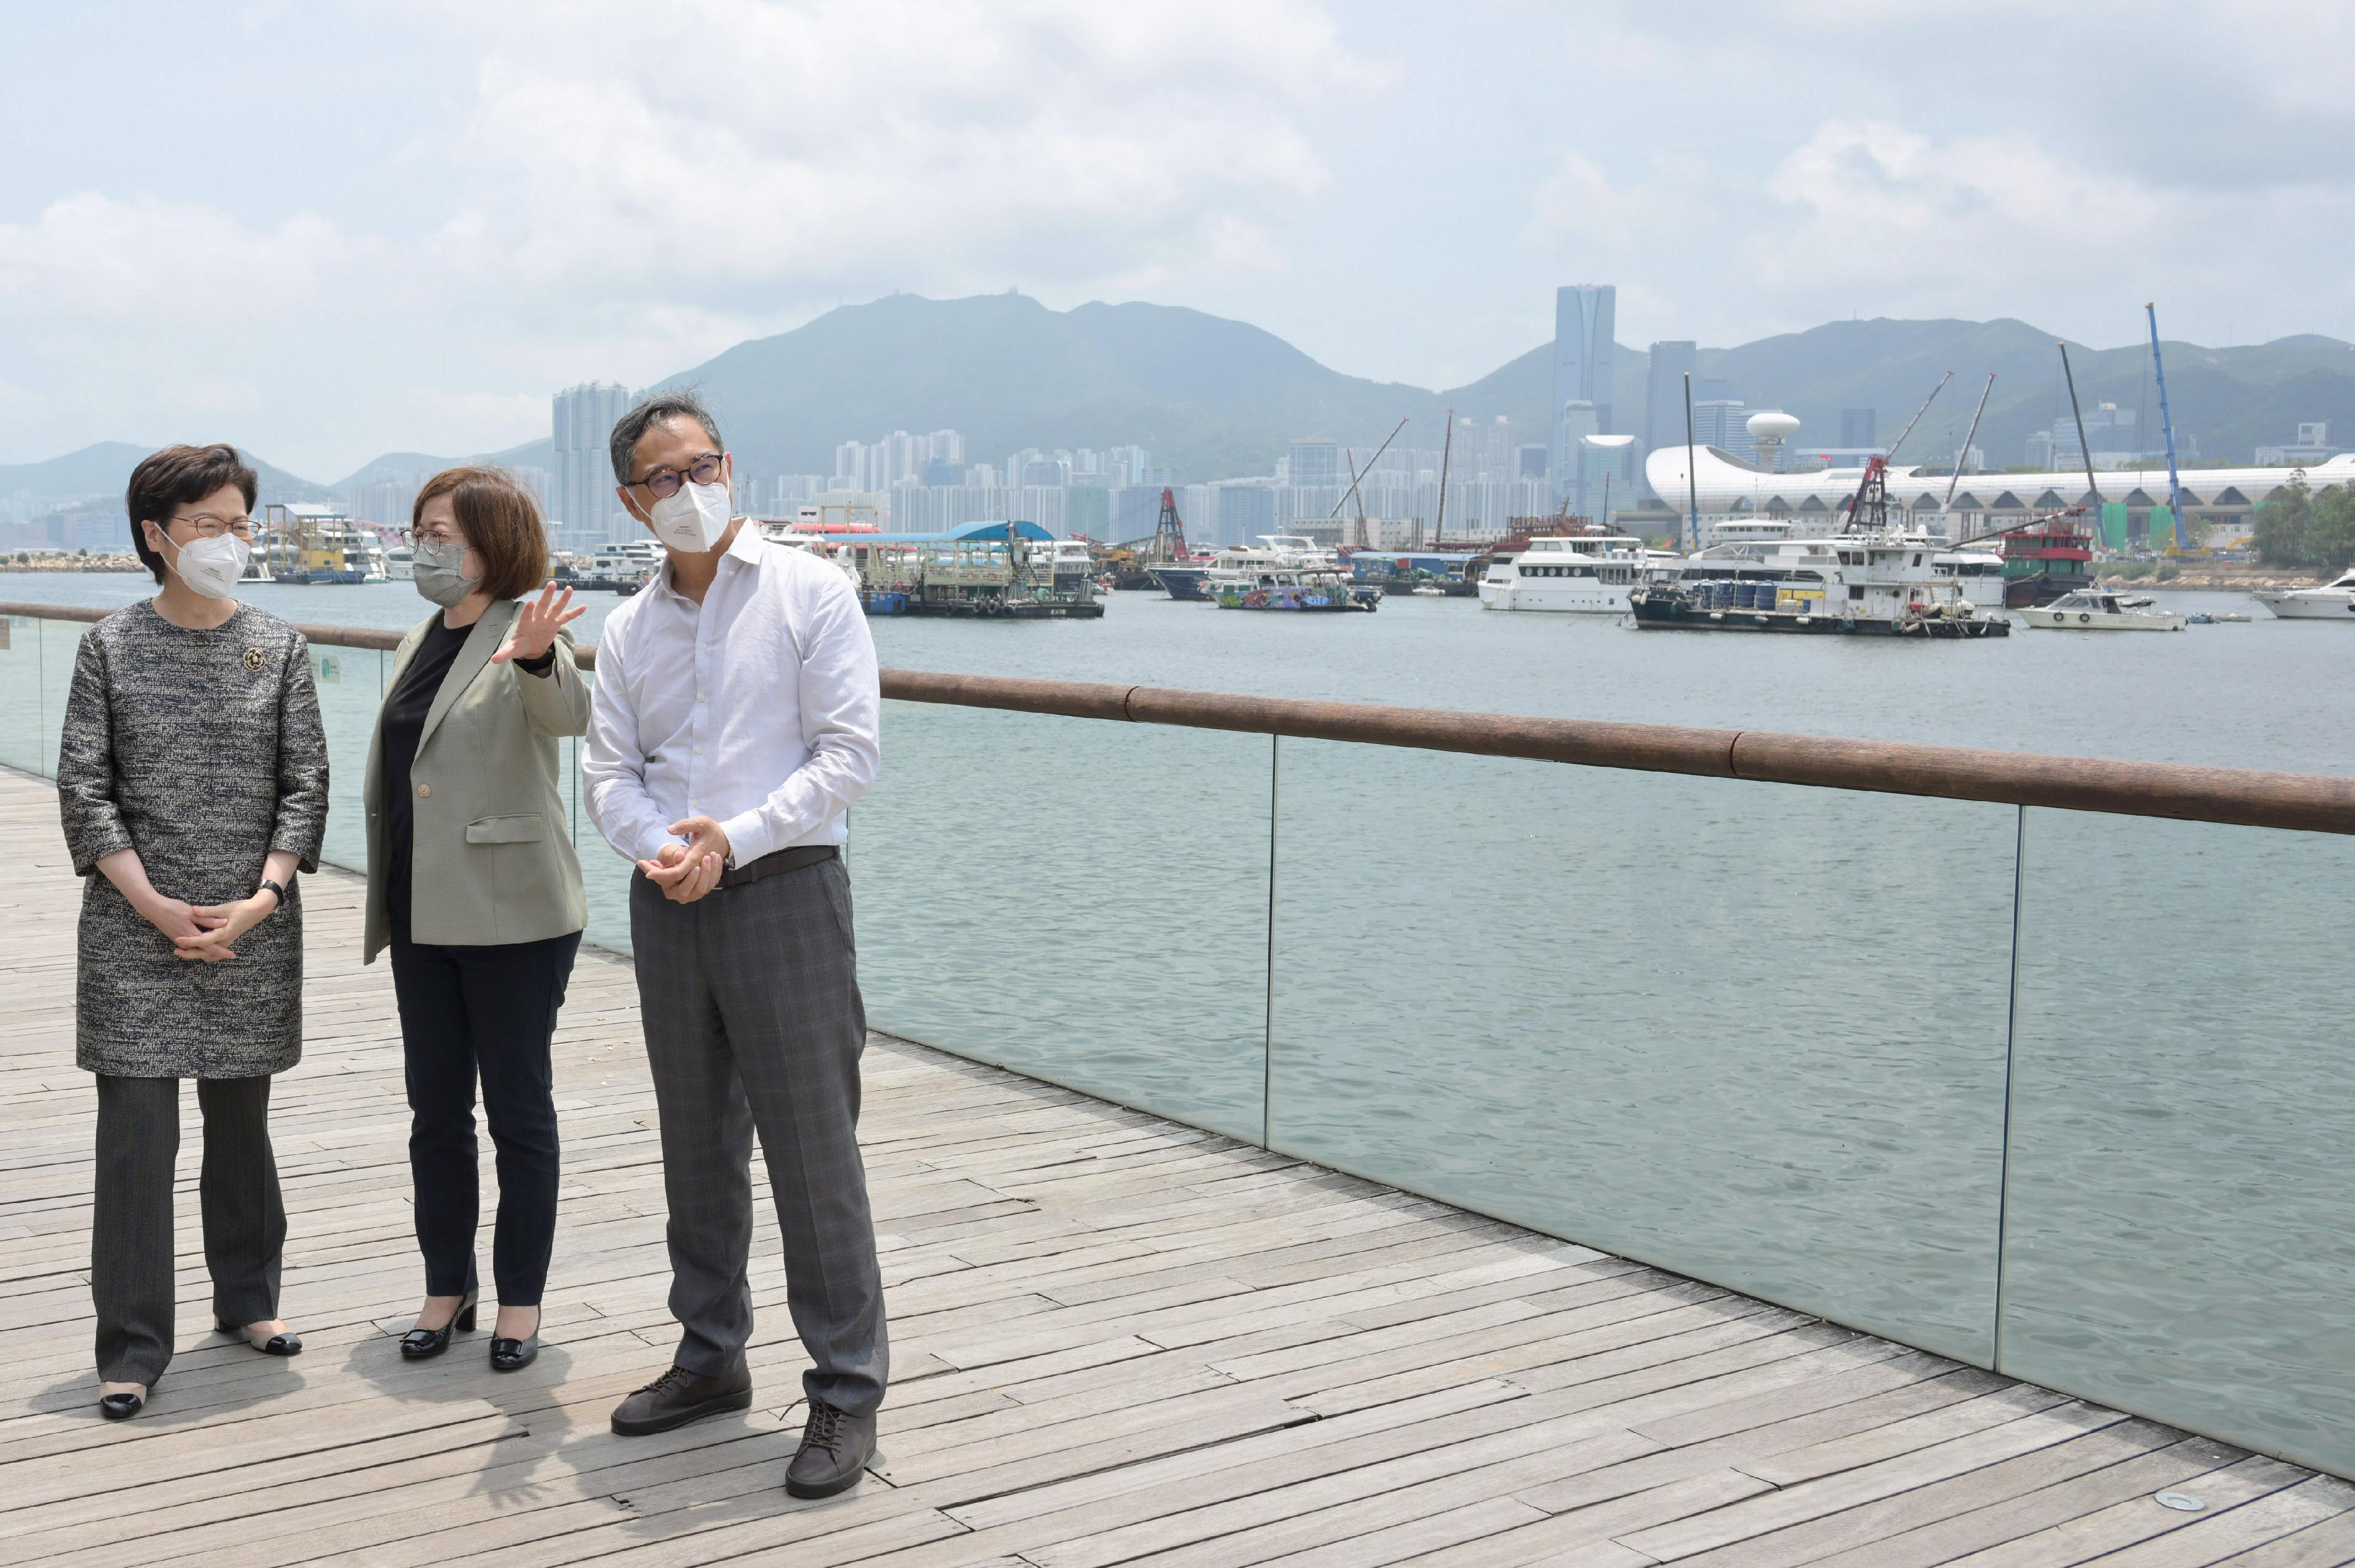 The Chief Executive, Mrs Carrie Lam, today (April 29) visited the Energizing Kowloon East Office (EKEO) and toured the area to survey the latest developments of the Energizing Kowloon East initiative. Photo shows Mrs Lam (left) touring the Kwun Tong Promenade. Also present are the Permanent Secretary for Development (Works), Mr Ricky Lau (right), and the Head of the EKEO, Ms Amy Cheung (centre).